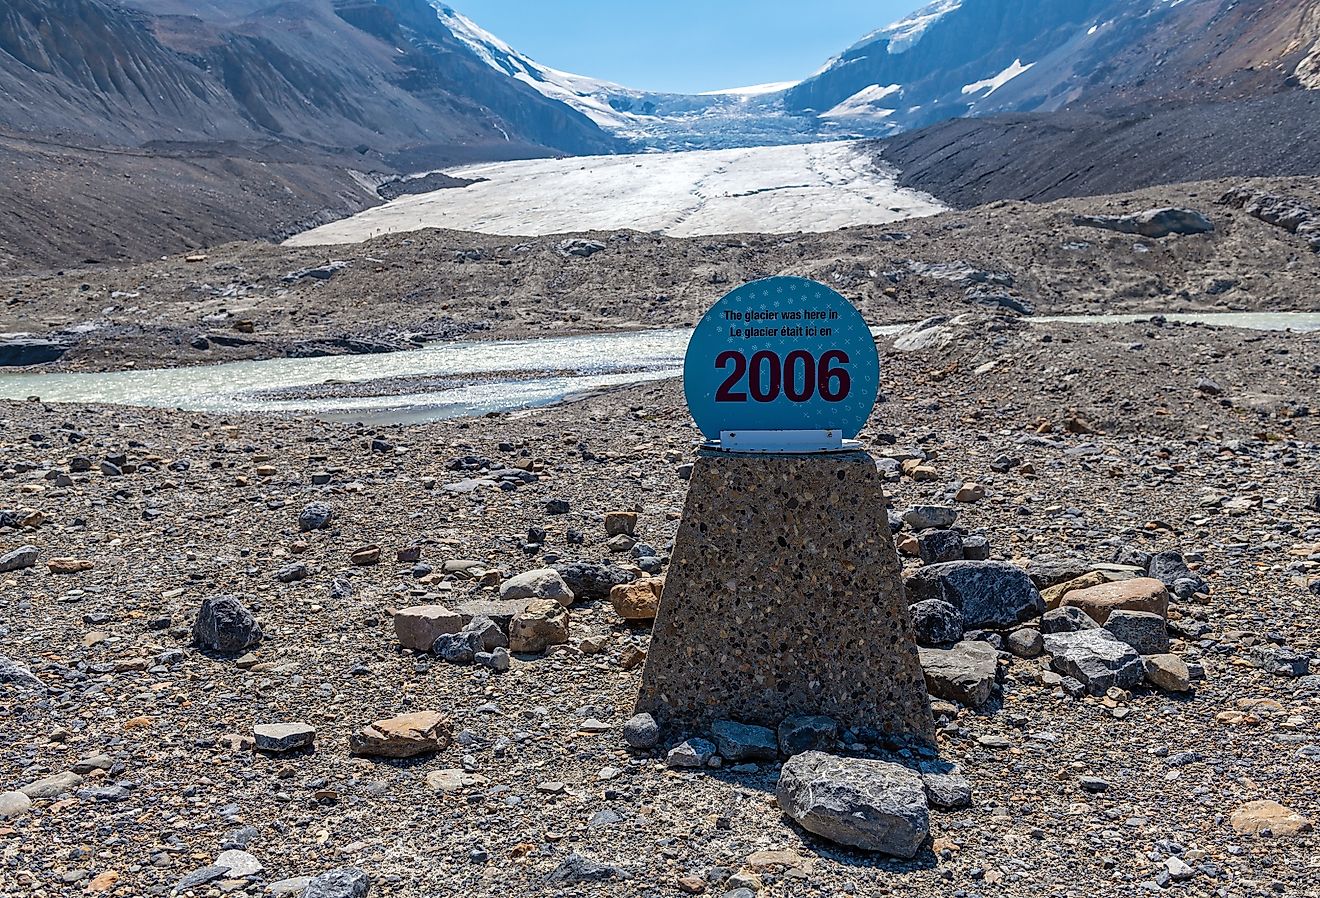 The melting Athabasca Glacier with the retreat between 2006 and 2023 due to climate change and global warming, Jasper National Park, Icefields Parkway, Canada.